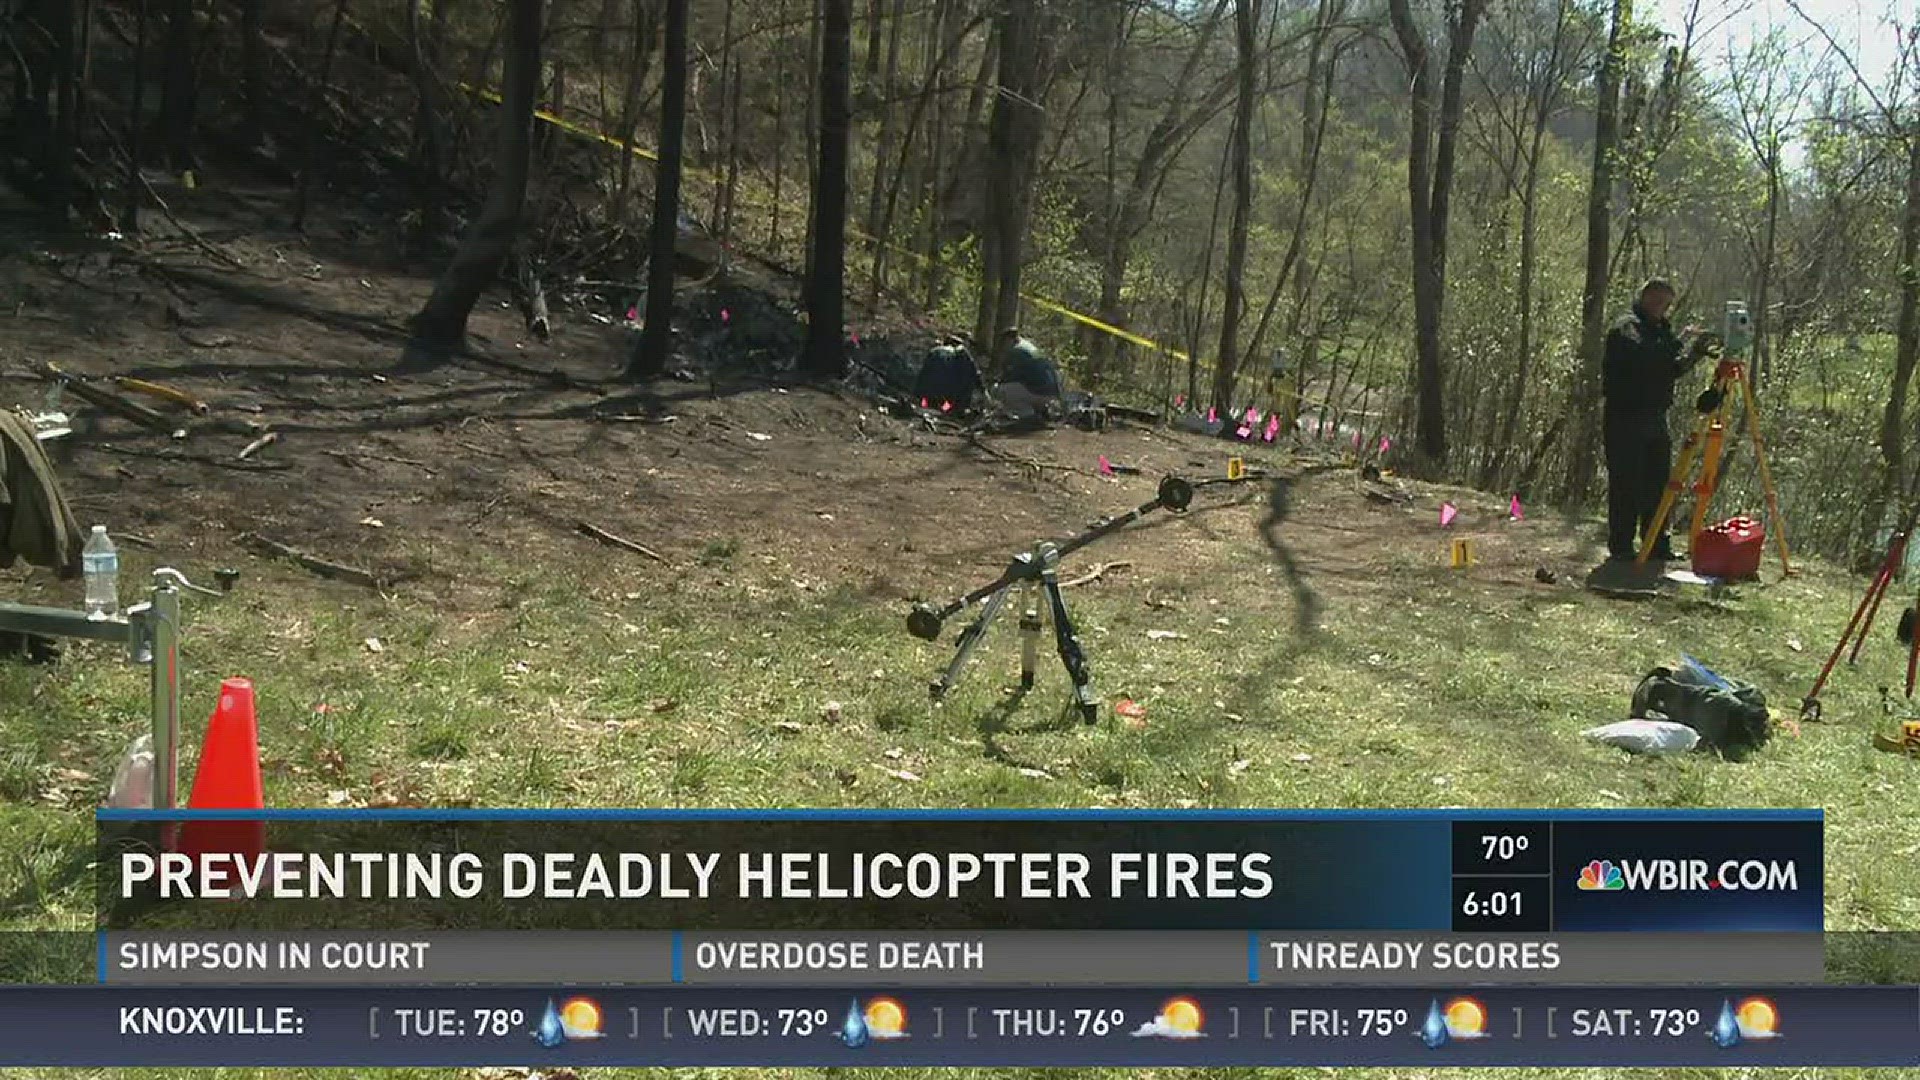 10News reporter Michael Crowe investigates the history of deadly helicopter crashes as a new report shows the cause of deaths for the five people killed earlier this year in a Pigeon Forge crash. (5/16/16)